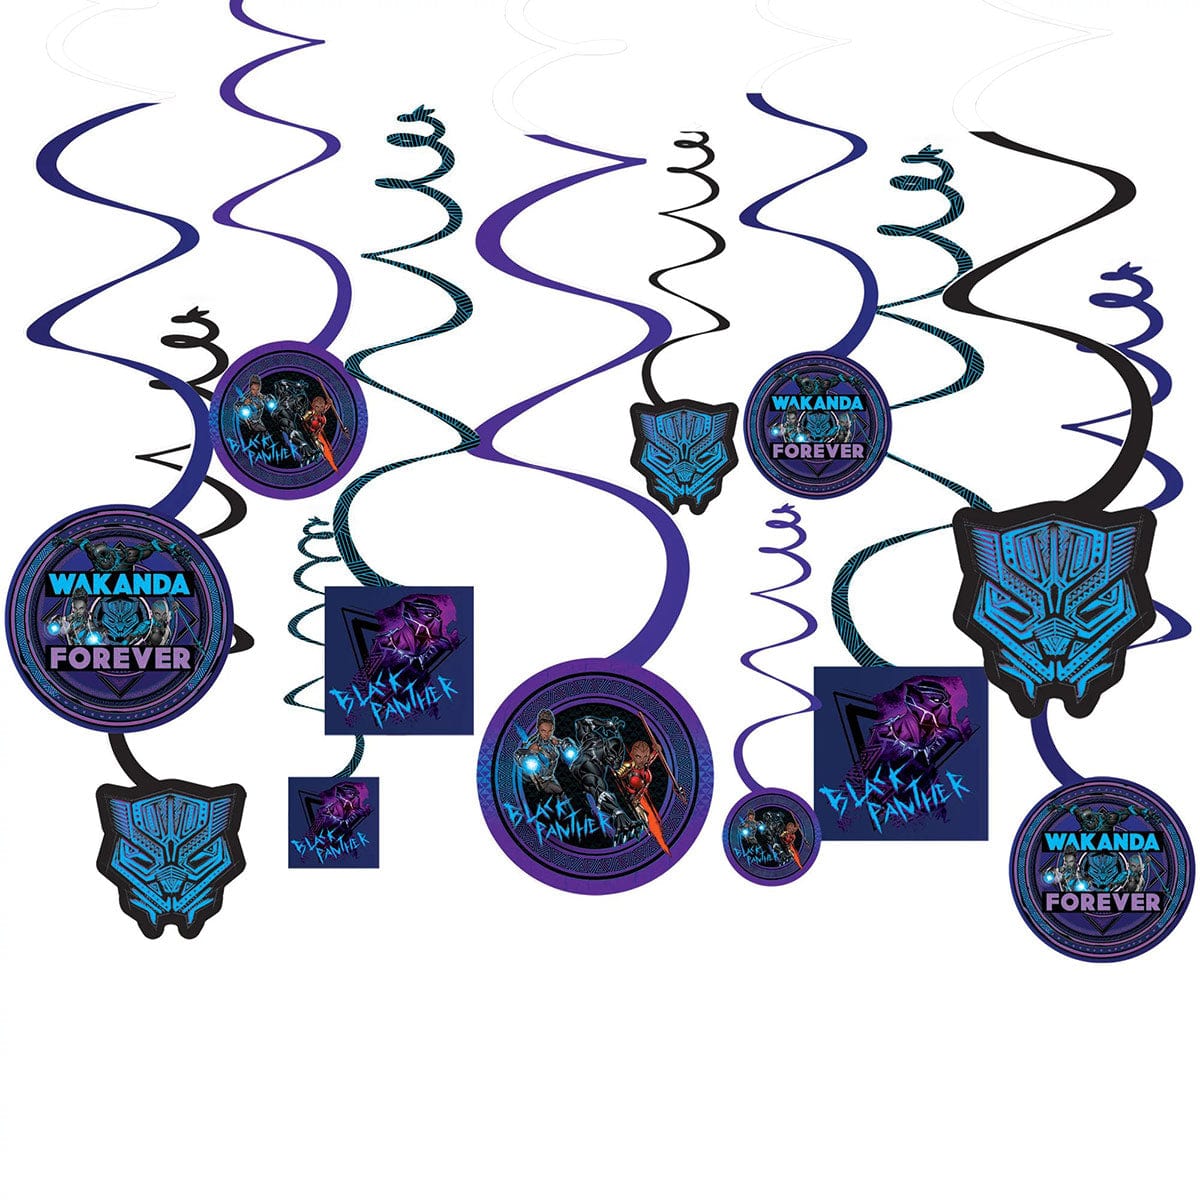 AMSCAN CA Kids Birthday Marvel Avengers Black Panther Wakanda Forever Spiral Decorations with Cutouts, 12 Count